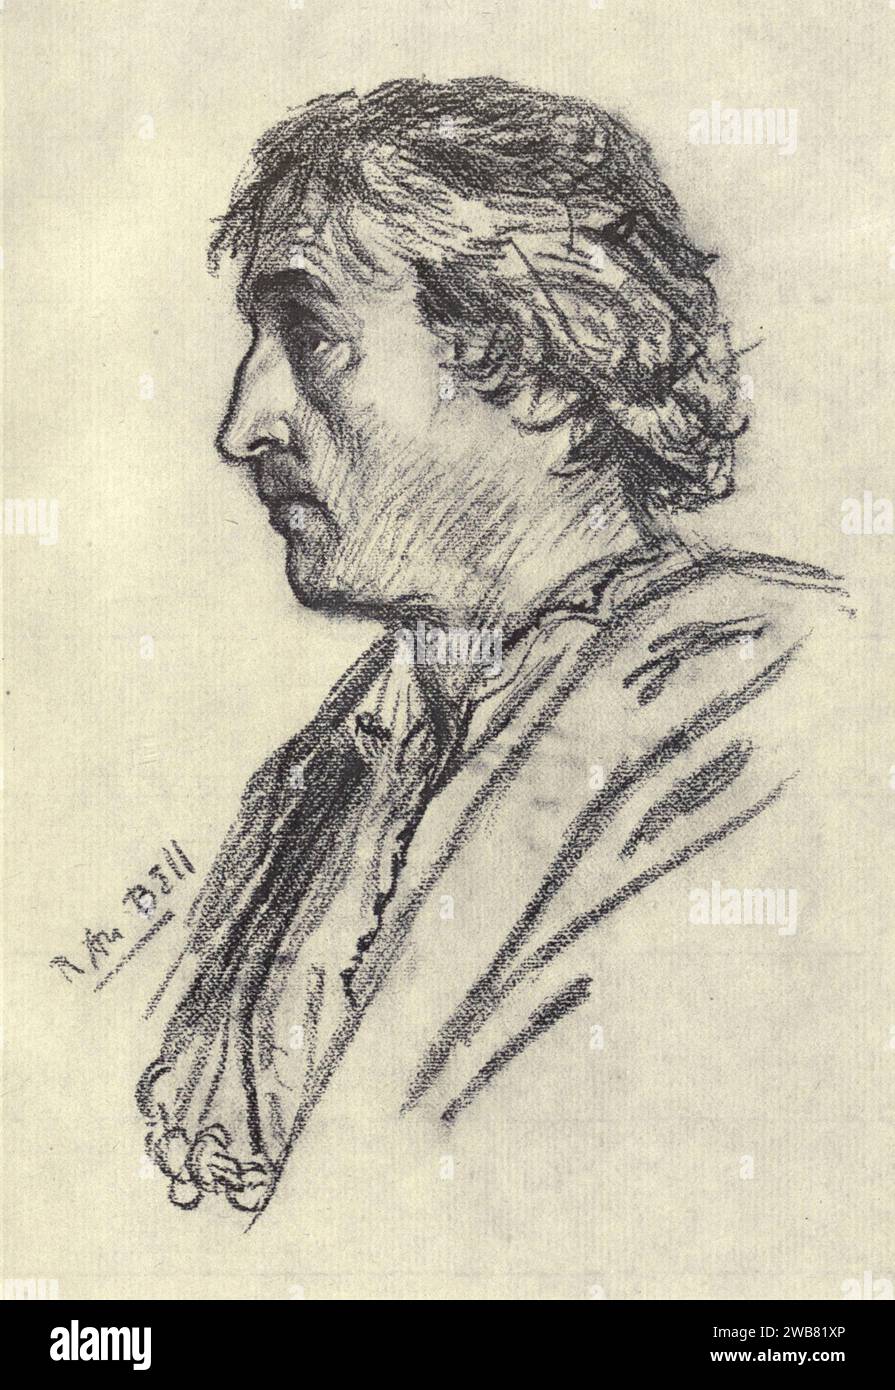 Martin Harvey as Hamlet by ROBERT ANNING BELL, A Tribute to the genius of William Shakespeare; being the programme of a performance at Drury Lane Theatre on May 2, 1916, the tercentenary of his death; humbly offered by the players and their fellow-workers in the kindred arts of music & painting MACMILLAN AND CO., LIMITED ST. MARTIN'S STREET, LONDON 1916 Stock Photo